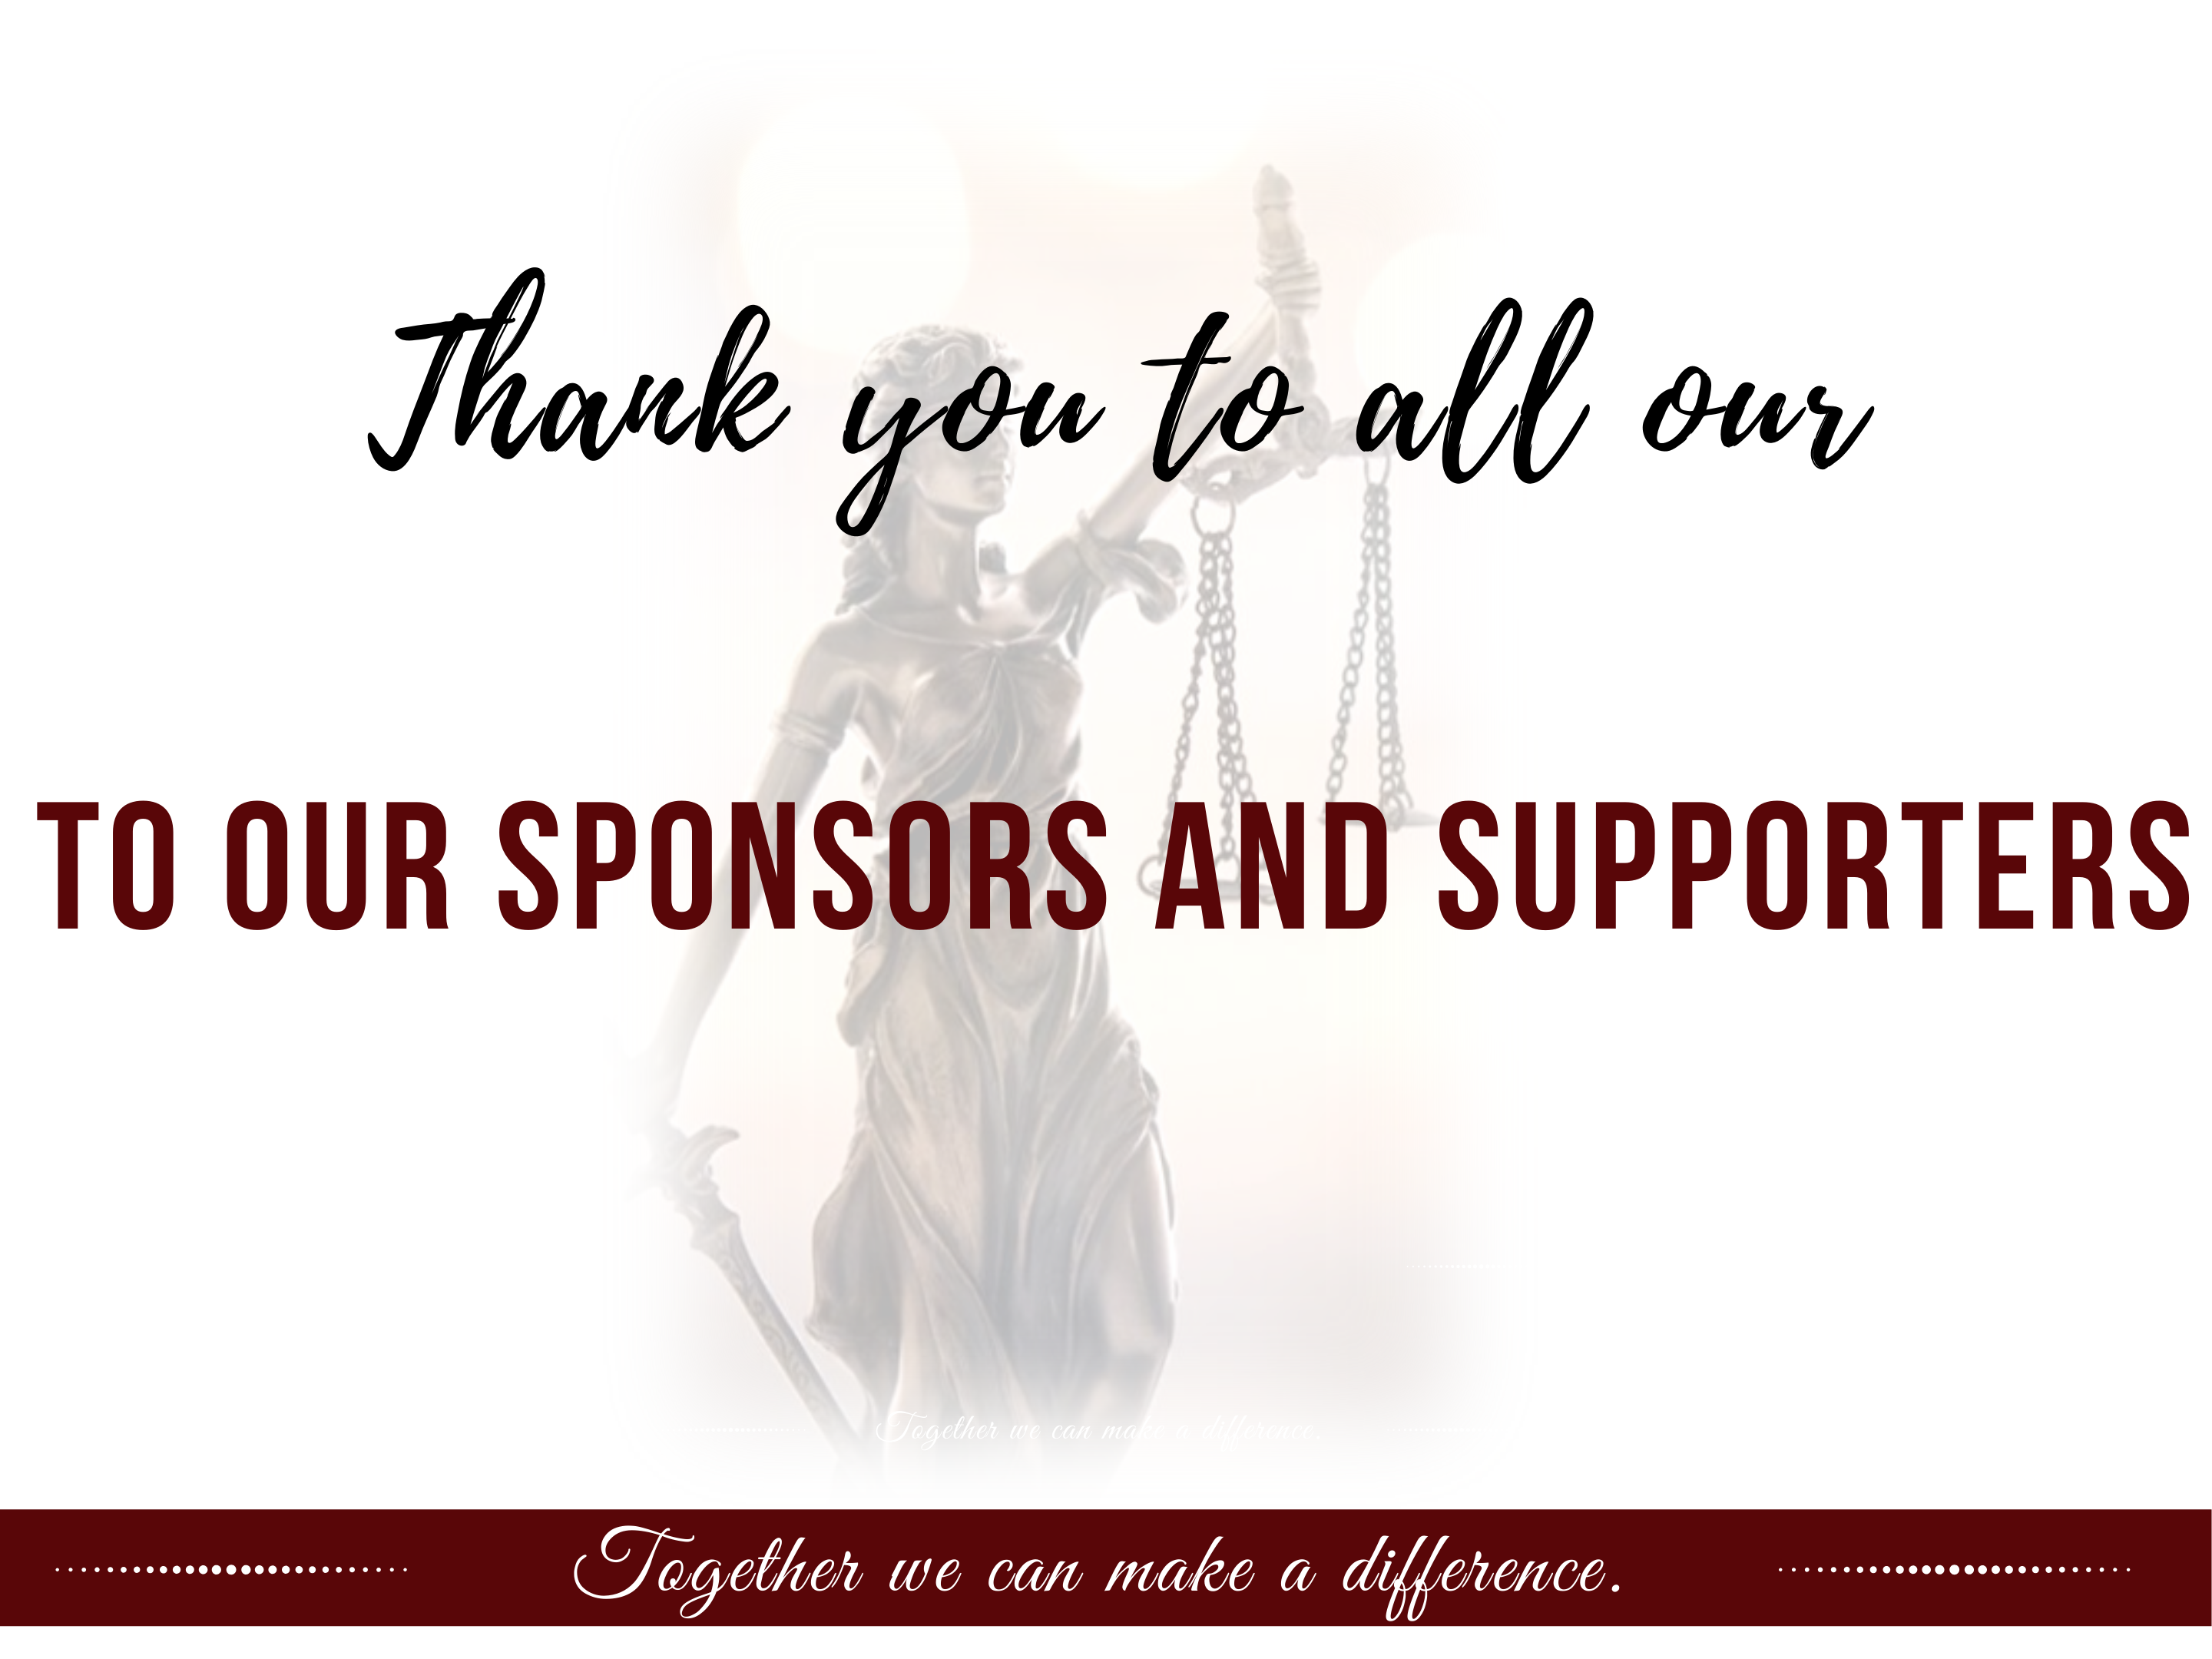 Our 2019 Commitment to Justice Event would not have been a success without the generous support from our Sponsors and Supporters.